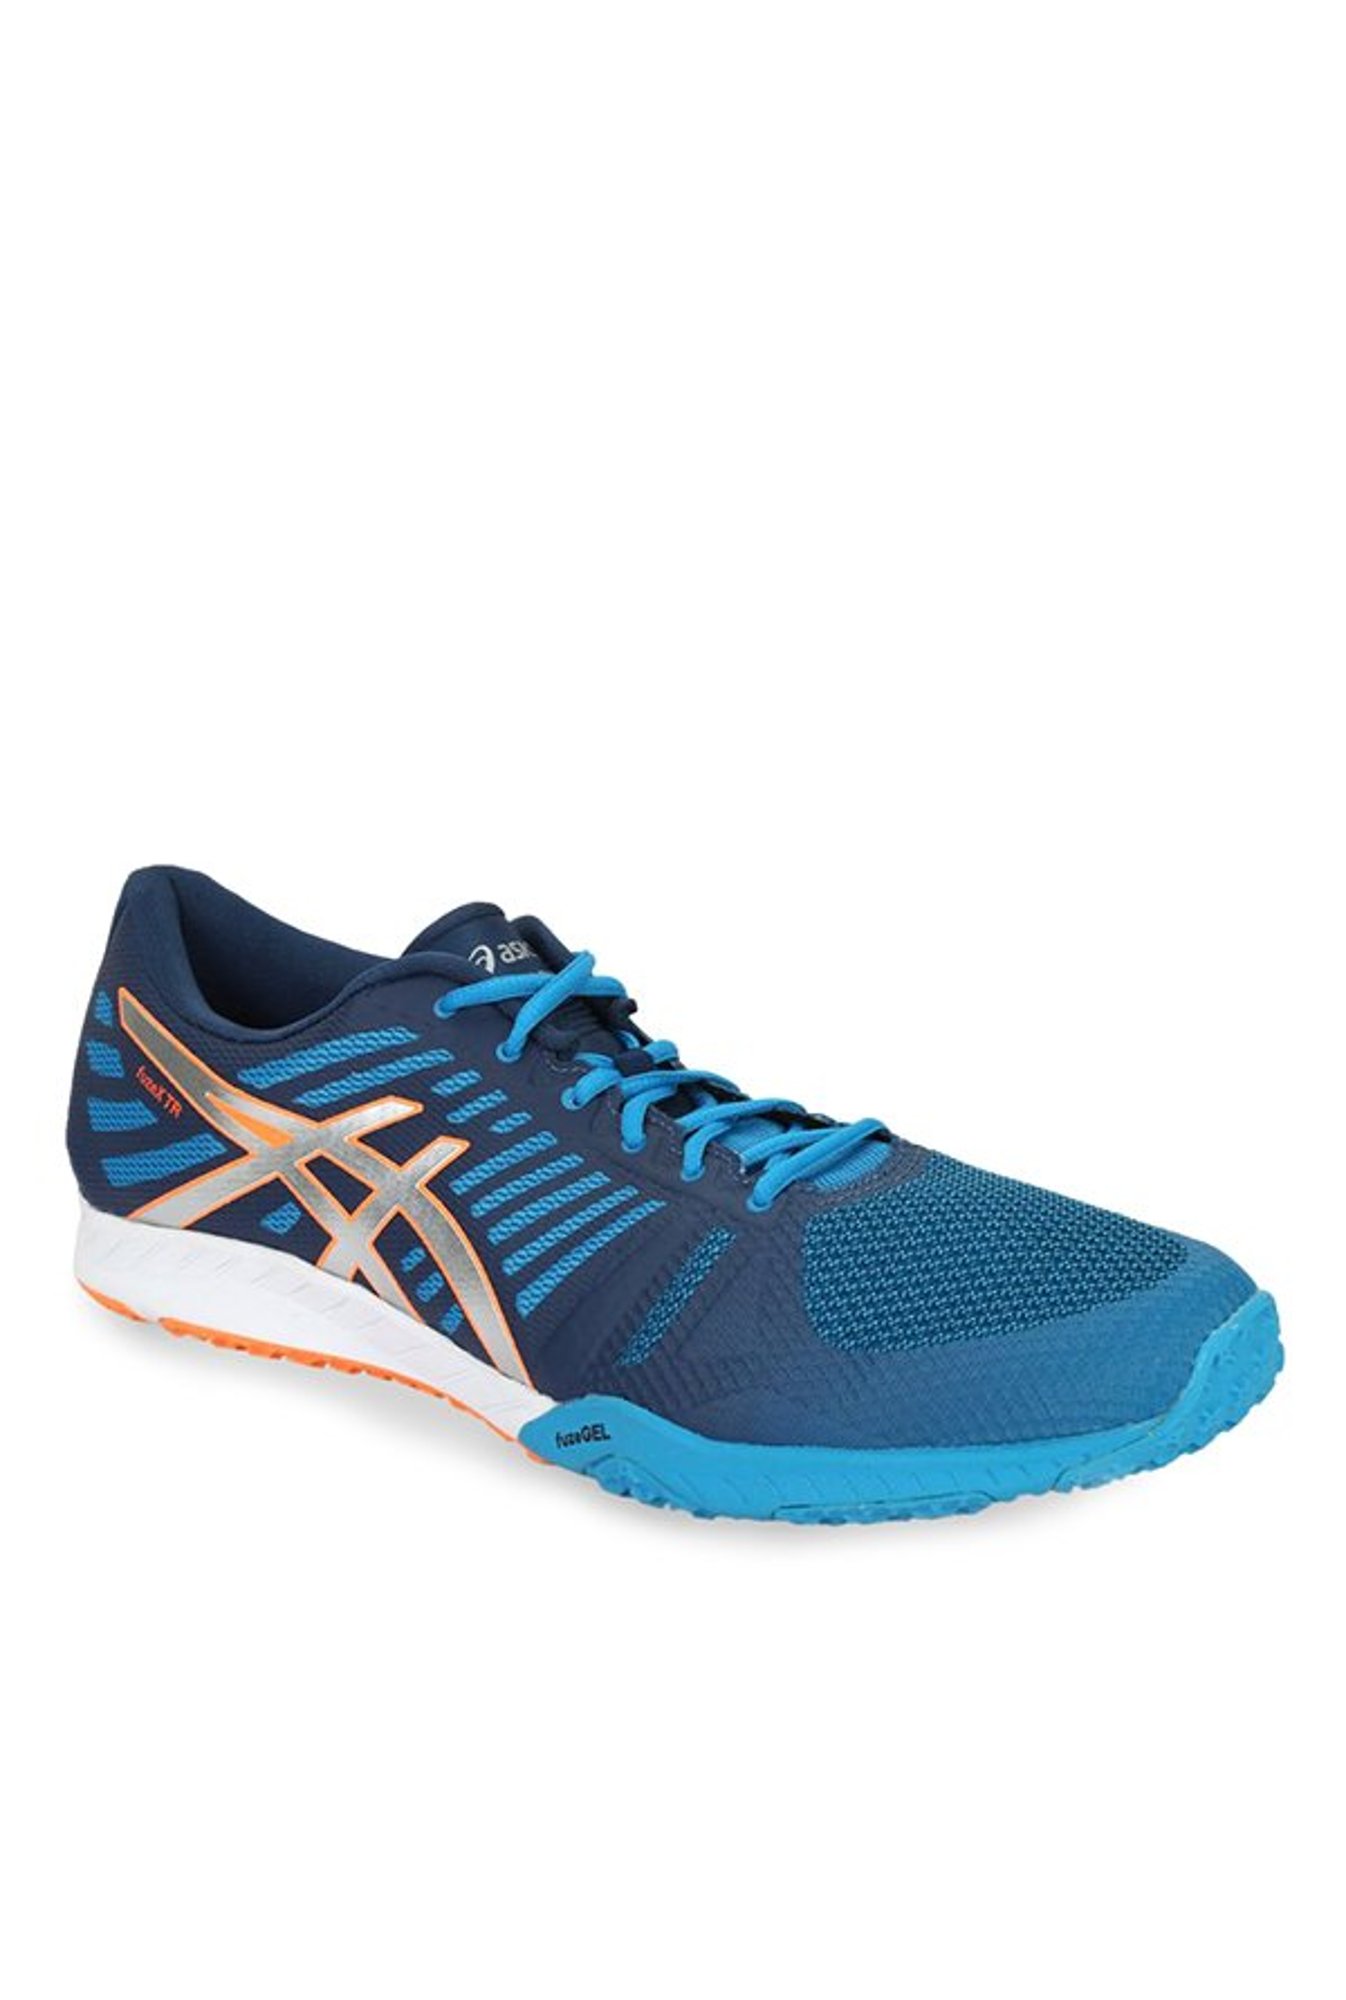 Buy FuzeX TR Blue Training Shoes for at Best Price @ Tata CLiQ